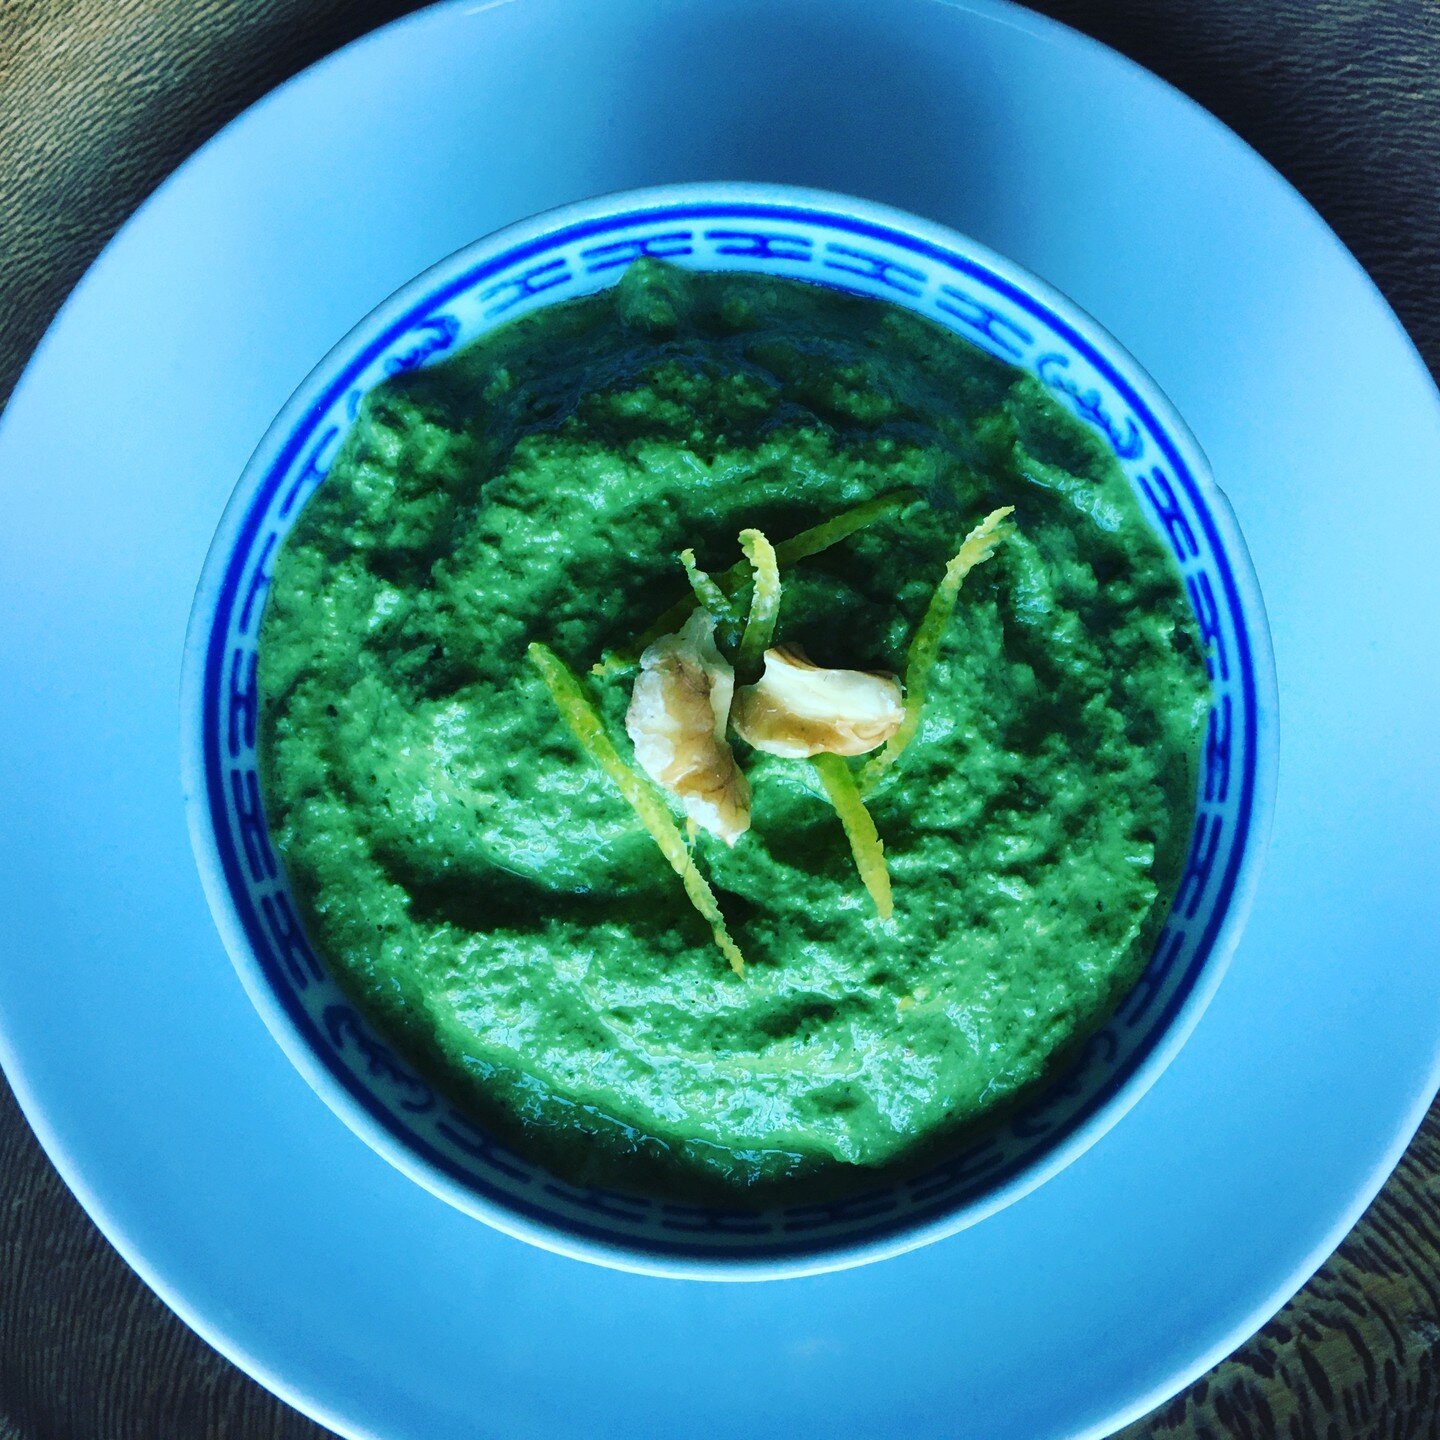 Wild garlic pesto - so delicious and packed full of nutrients that support hormonal balance. Made with wild garlic freshly picked, walnuts, olive oil, lemon zest and juice, a little sea salt.

#wildgarlic, #nutrientdense, #happyhormones, #naturesboun